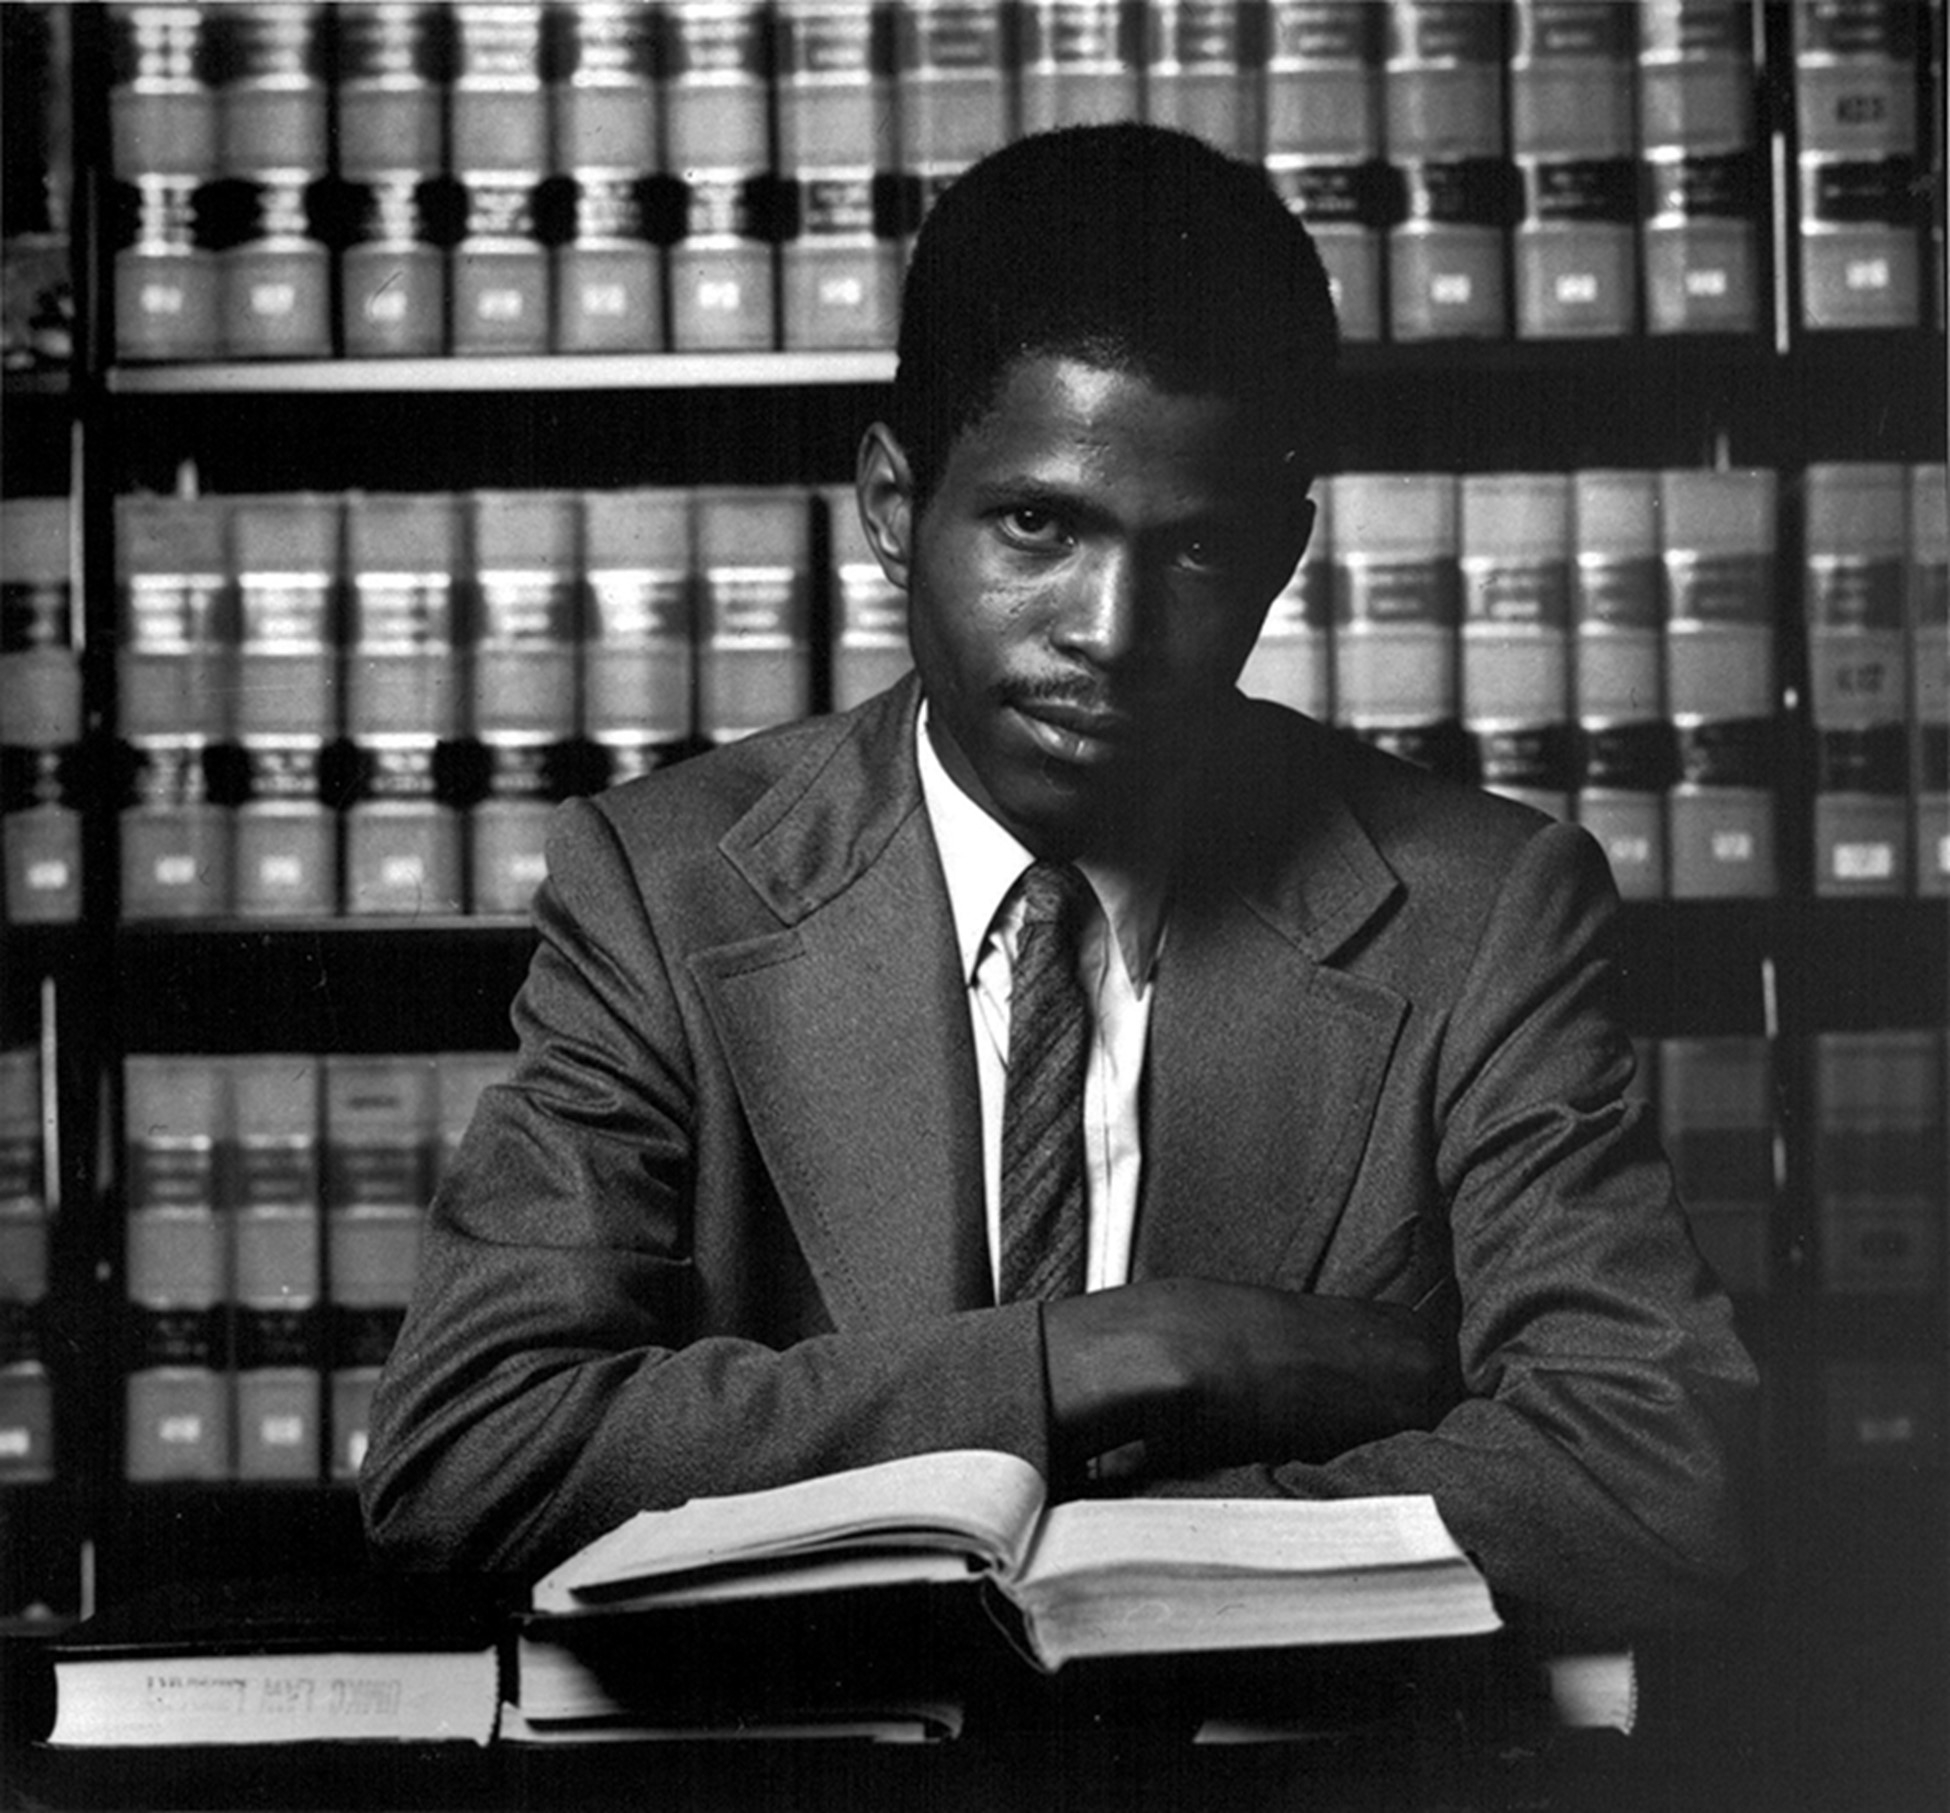 Portrait of Alvin Sykes, seated with law book. Courtesy of the Kansas City Star.